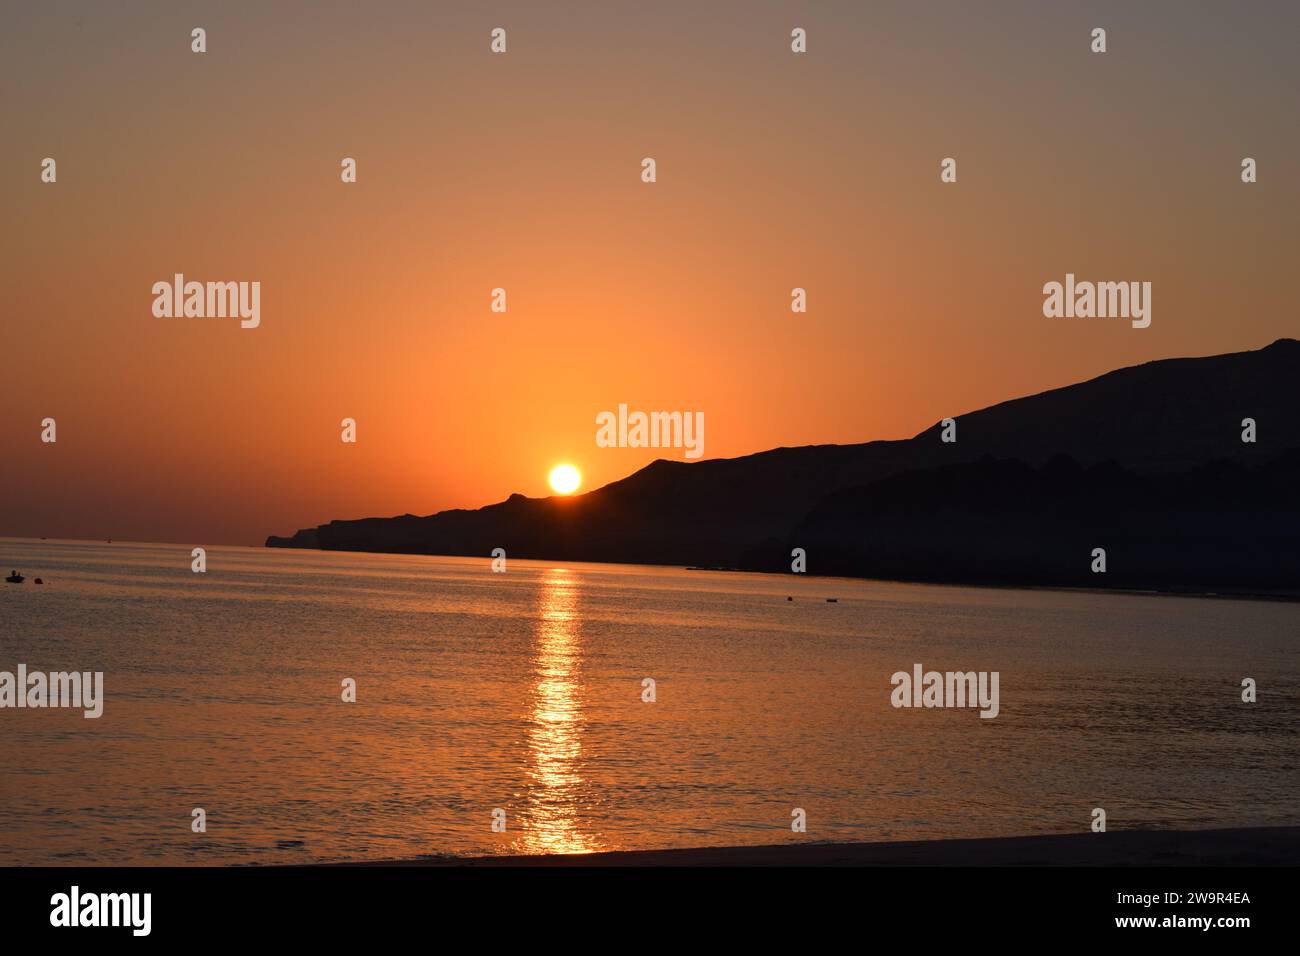 The sky is ablaze with color as the sun rises over the horizon. Stock Photo